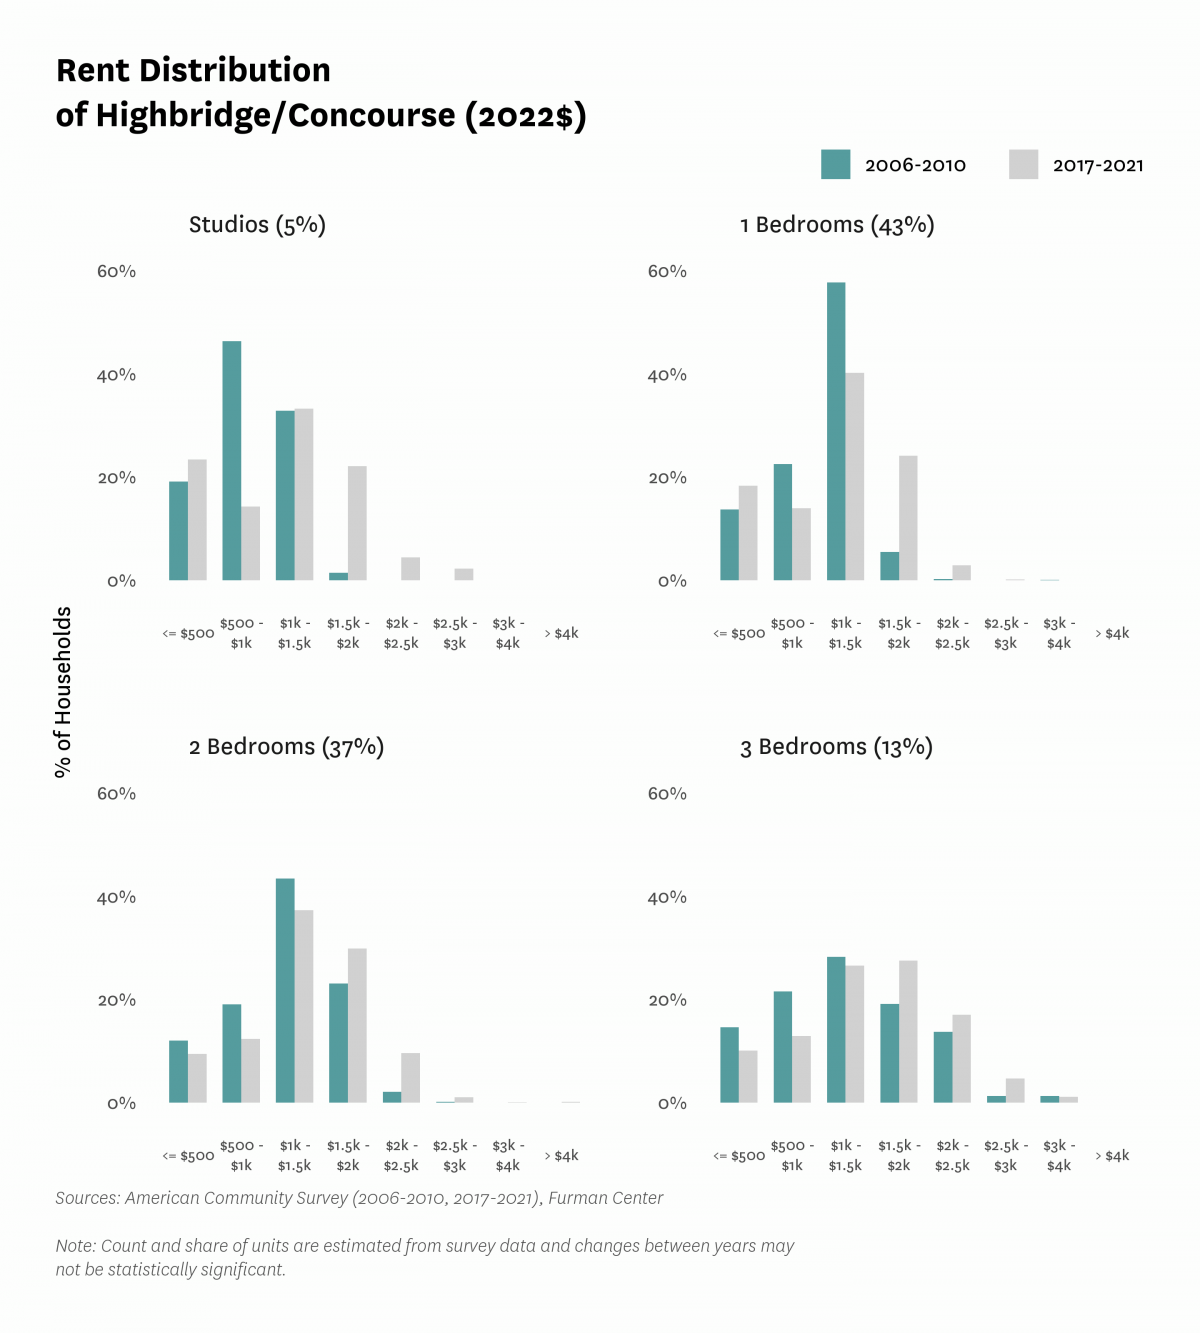 Graph showing the distribution of rents in Highbridge/Concourse in both 2010 and 2017-2021.